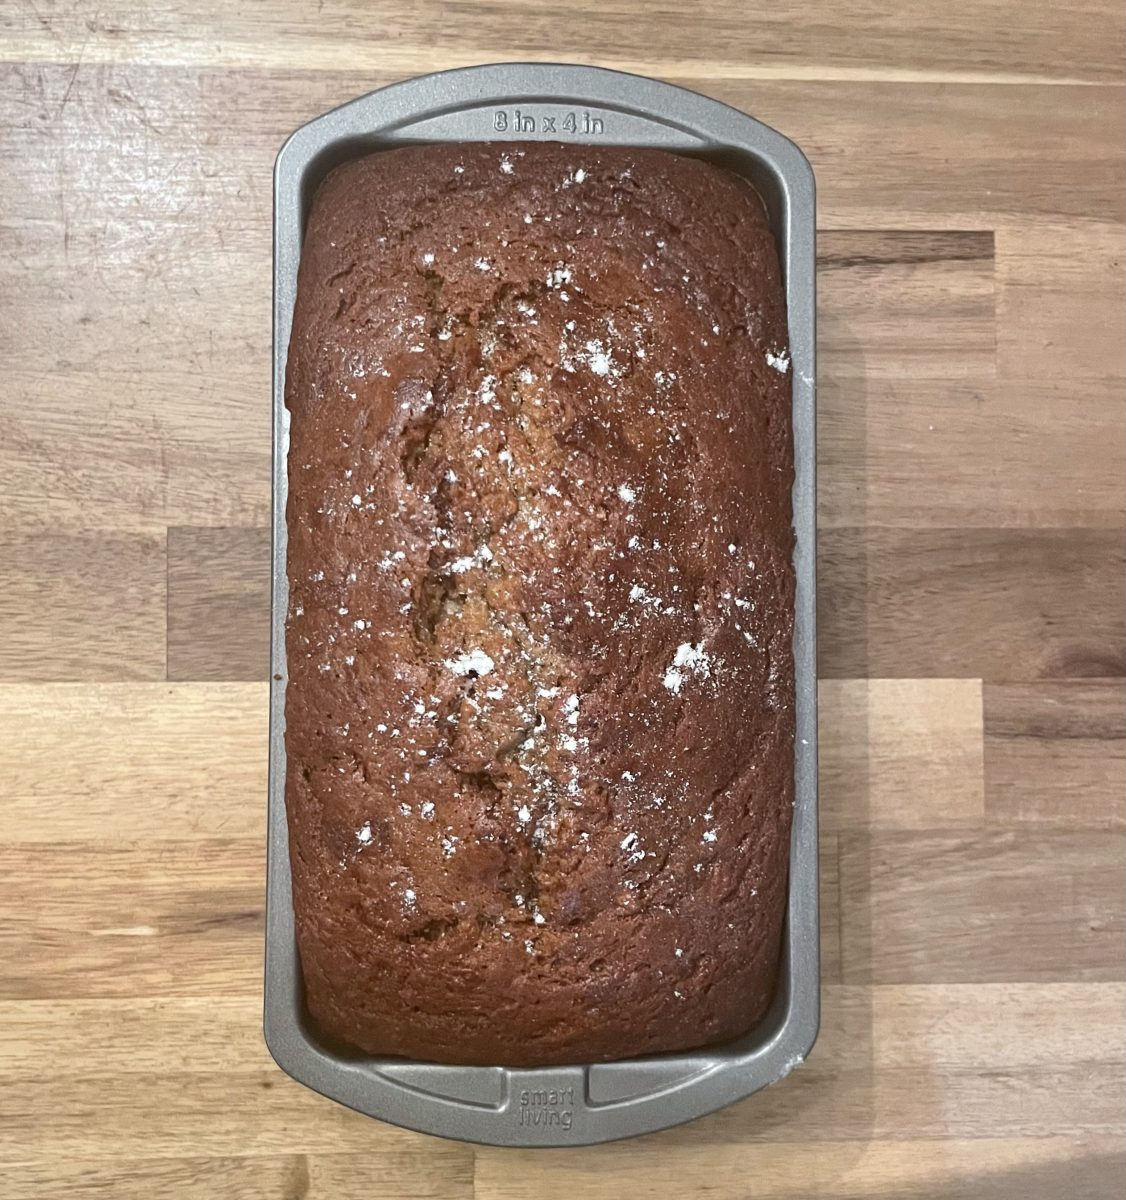 Banana-apple bread is an easy loaf to prepare for busy mornings.